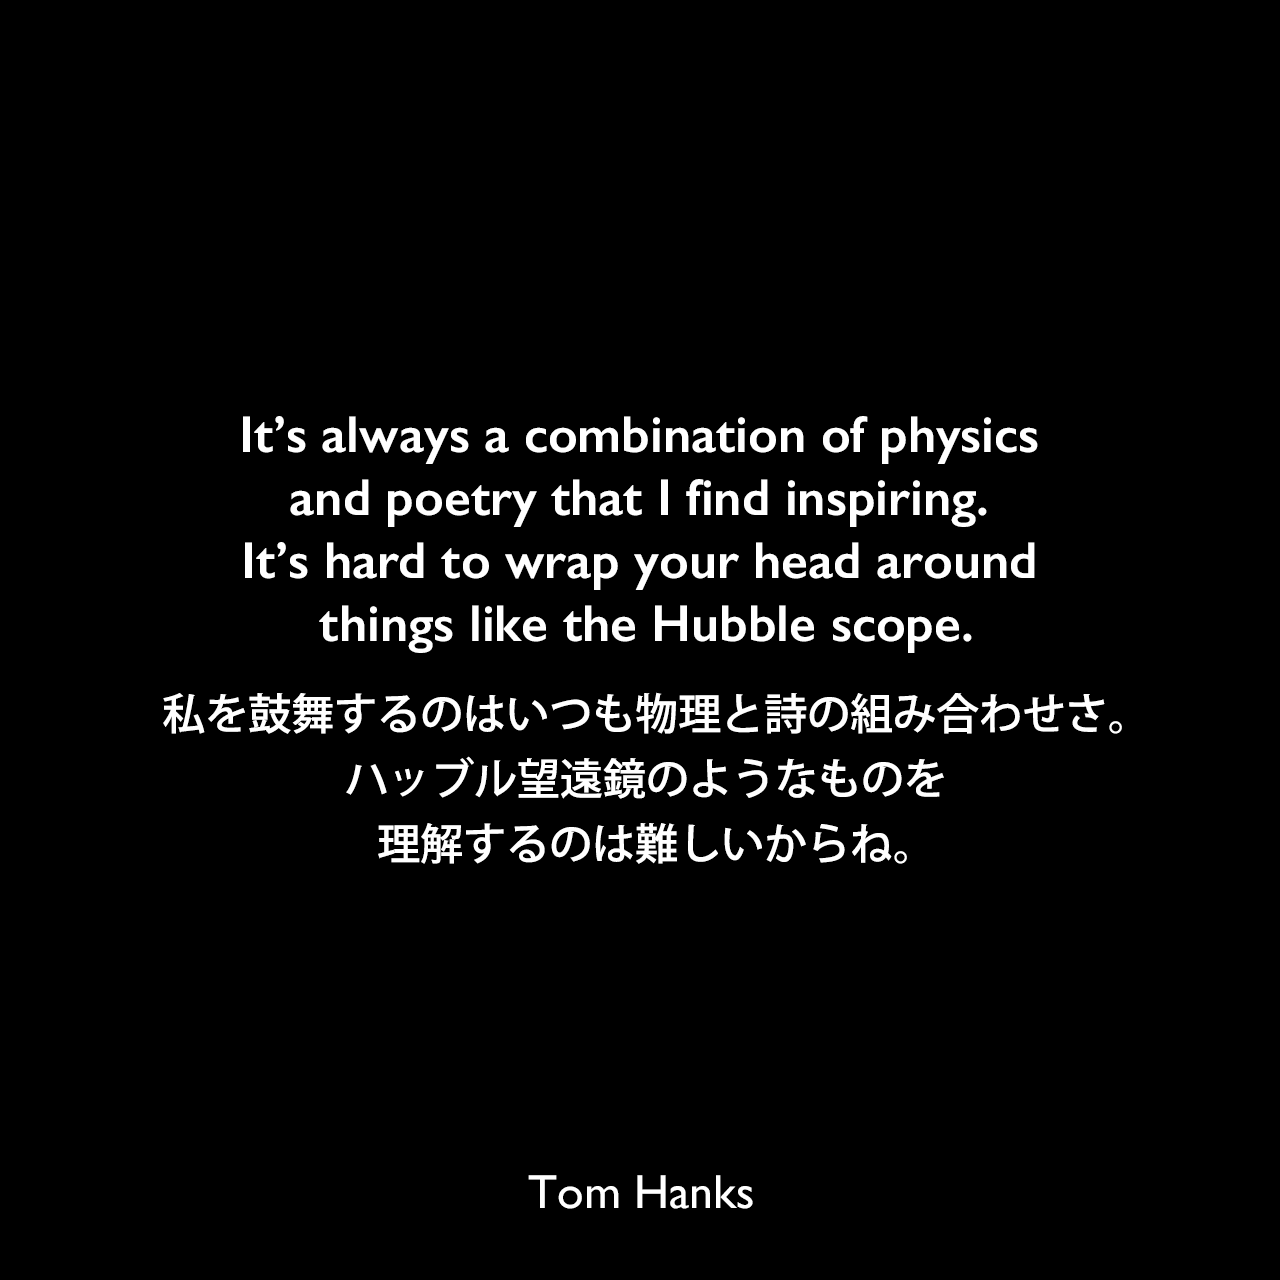 It’s always a combination of physics and poetry that I find inspiring. It’s hard to wrap your head around things like the Hubble scope.私を鼓舞するのはいつも物理と詩の組み合わせさ。ハッブル望遠鏡のようなものを理解するのは難しいからね。Tom Hanks